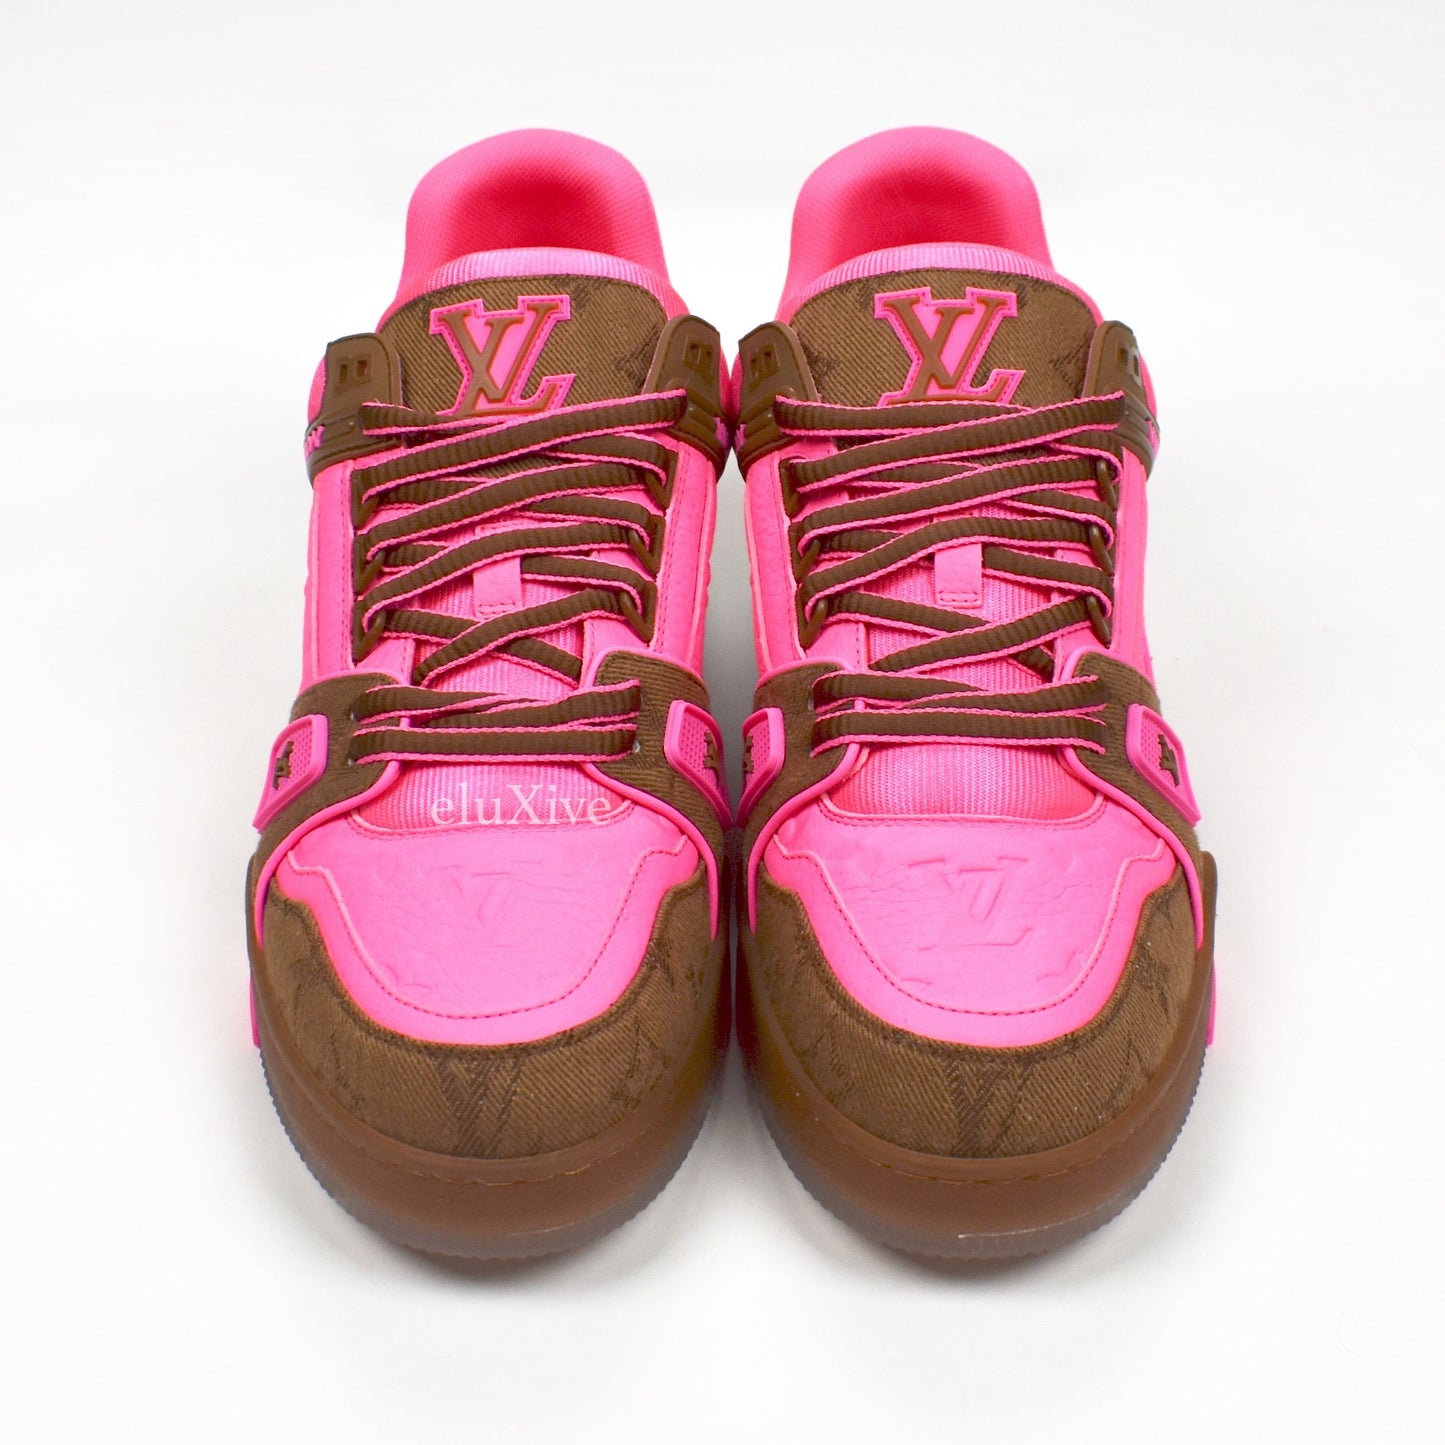 LV Trainers Full diamond pink brown color matching